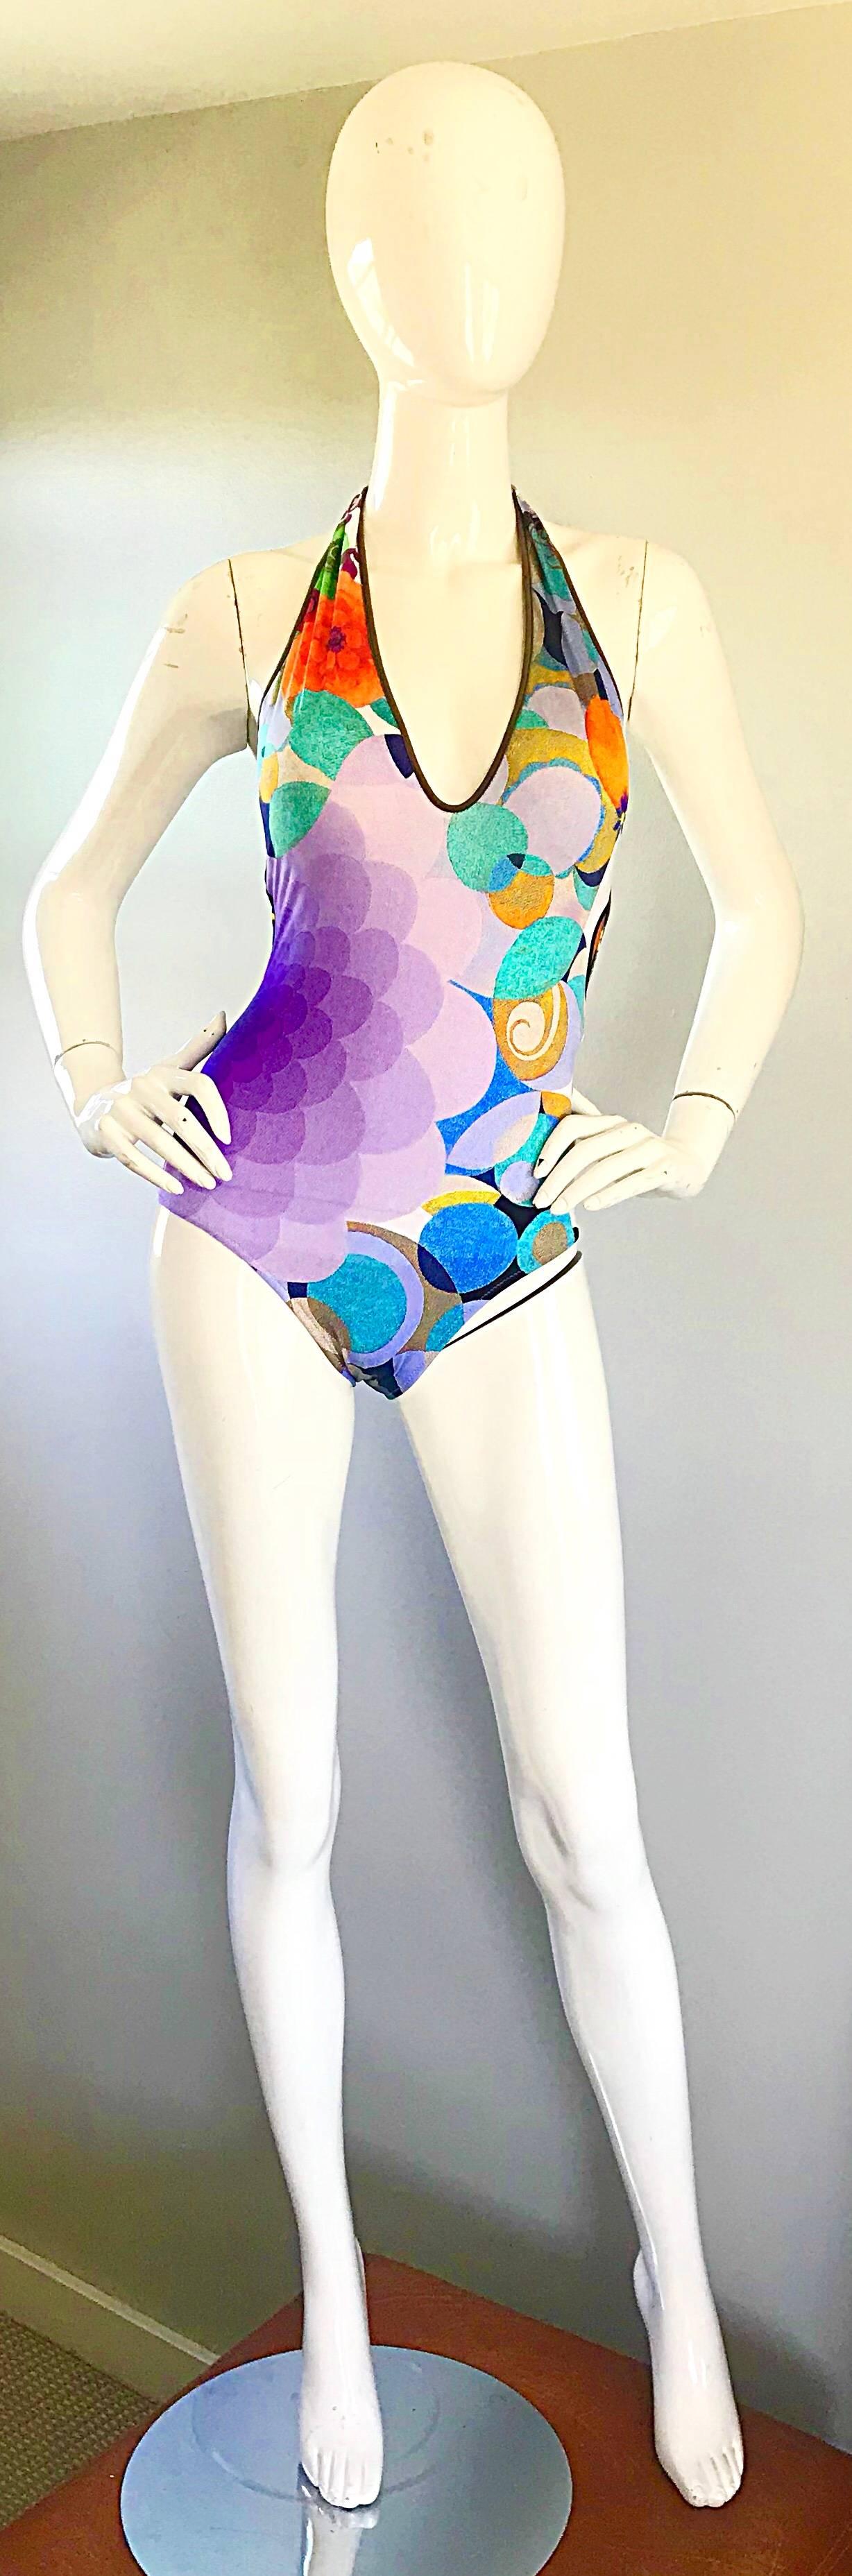 Gorgeous flattering brand new with original tags vintage 90s LA PERLA op-art one piece halter swimsuit or bodysuit ! Features vibrant colors of purple, blue, orange, teal, yellow, and white throughout. Halter neck loops through a white plastic